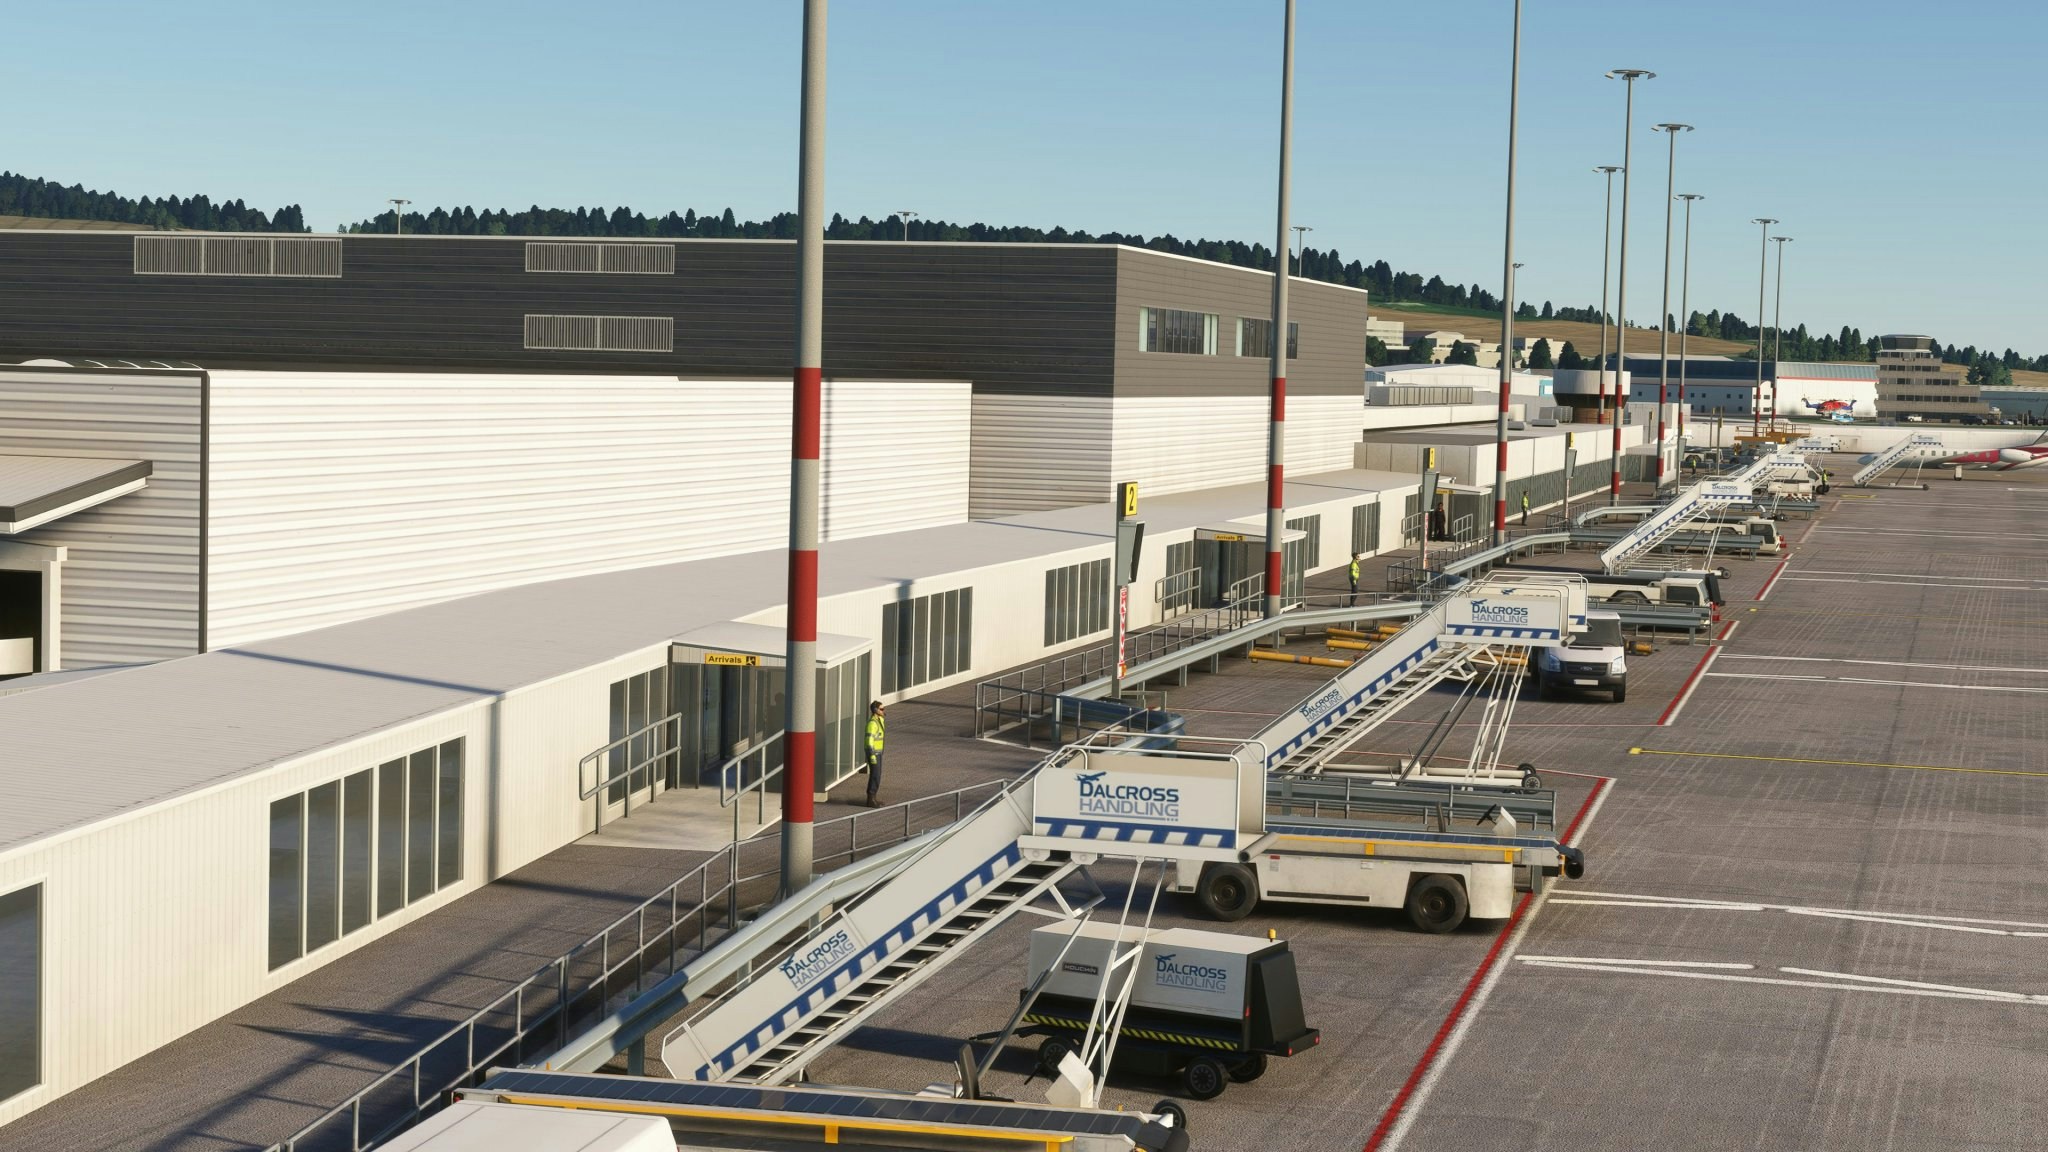 UK2000 Scenery Releases Aberdeen Airport for MSFS